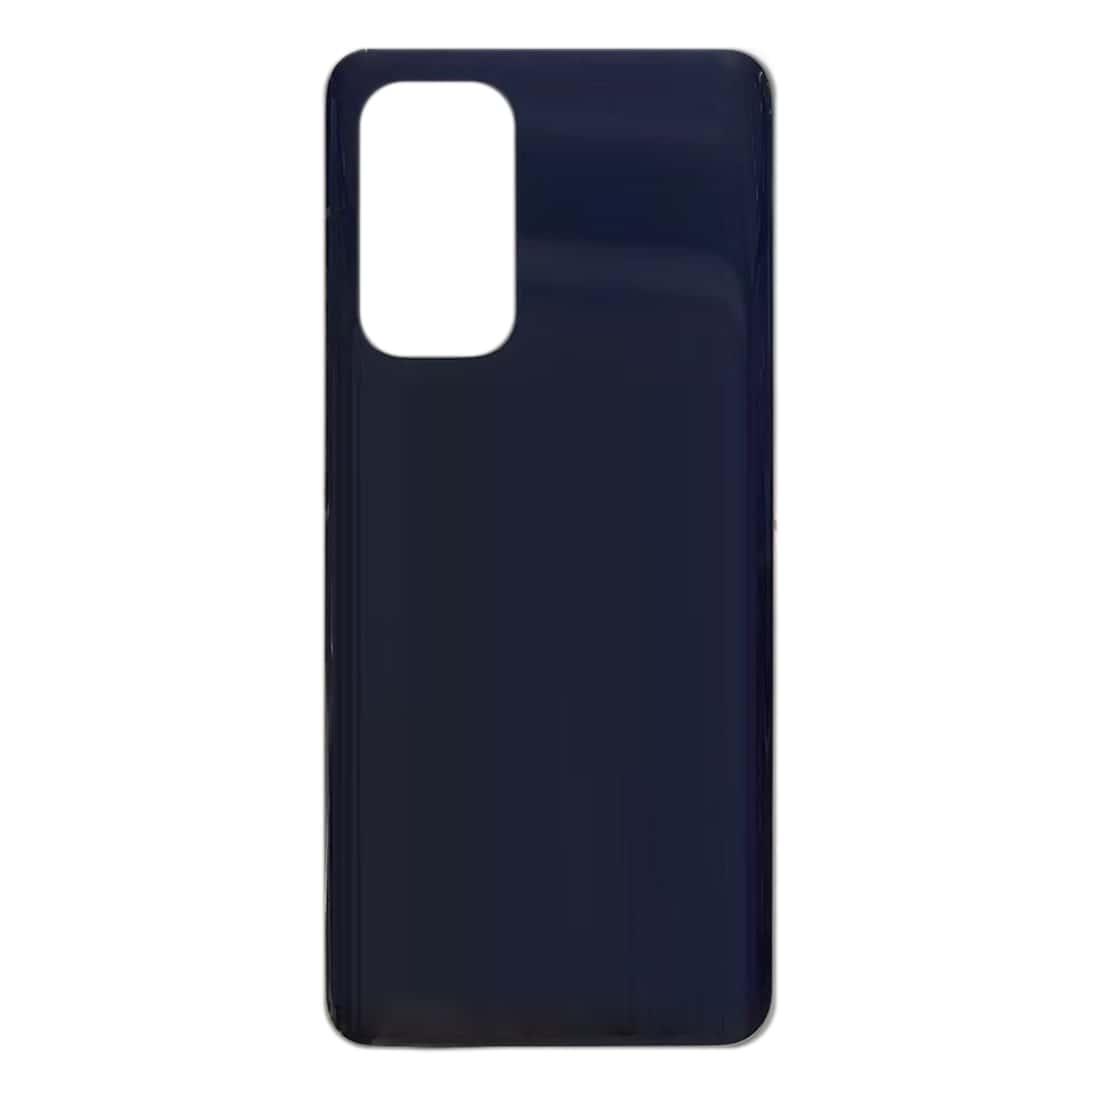 Back Glass Panel for  Oneplus 9 Black